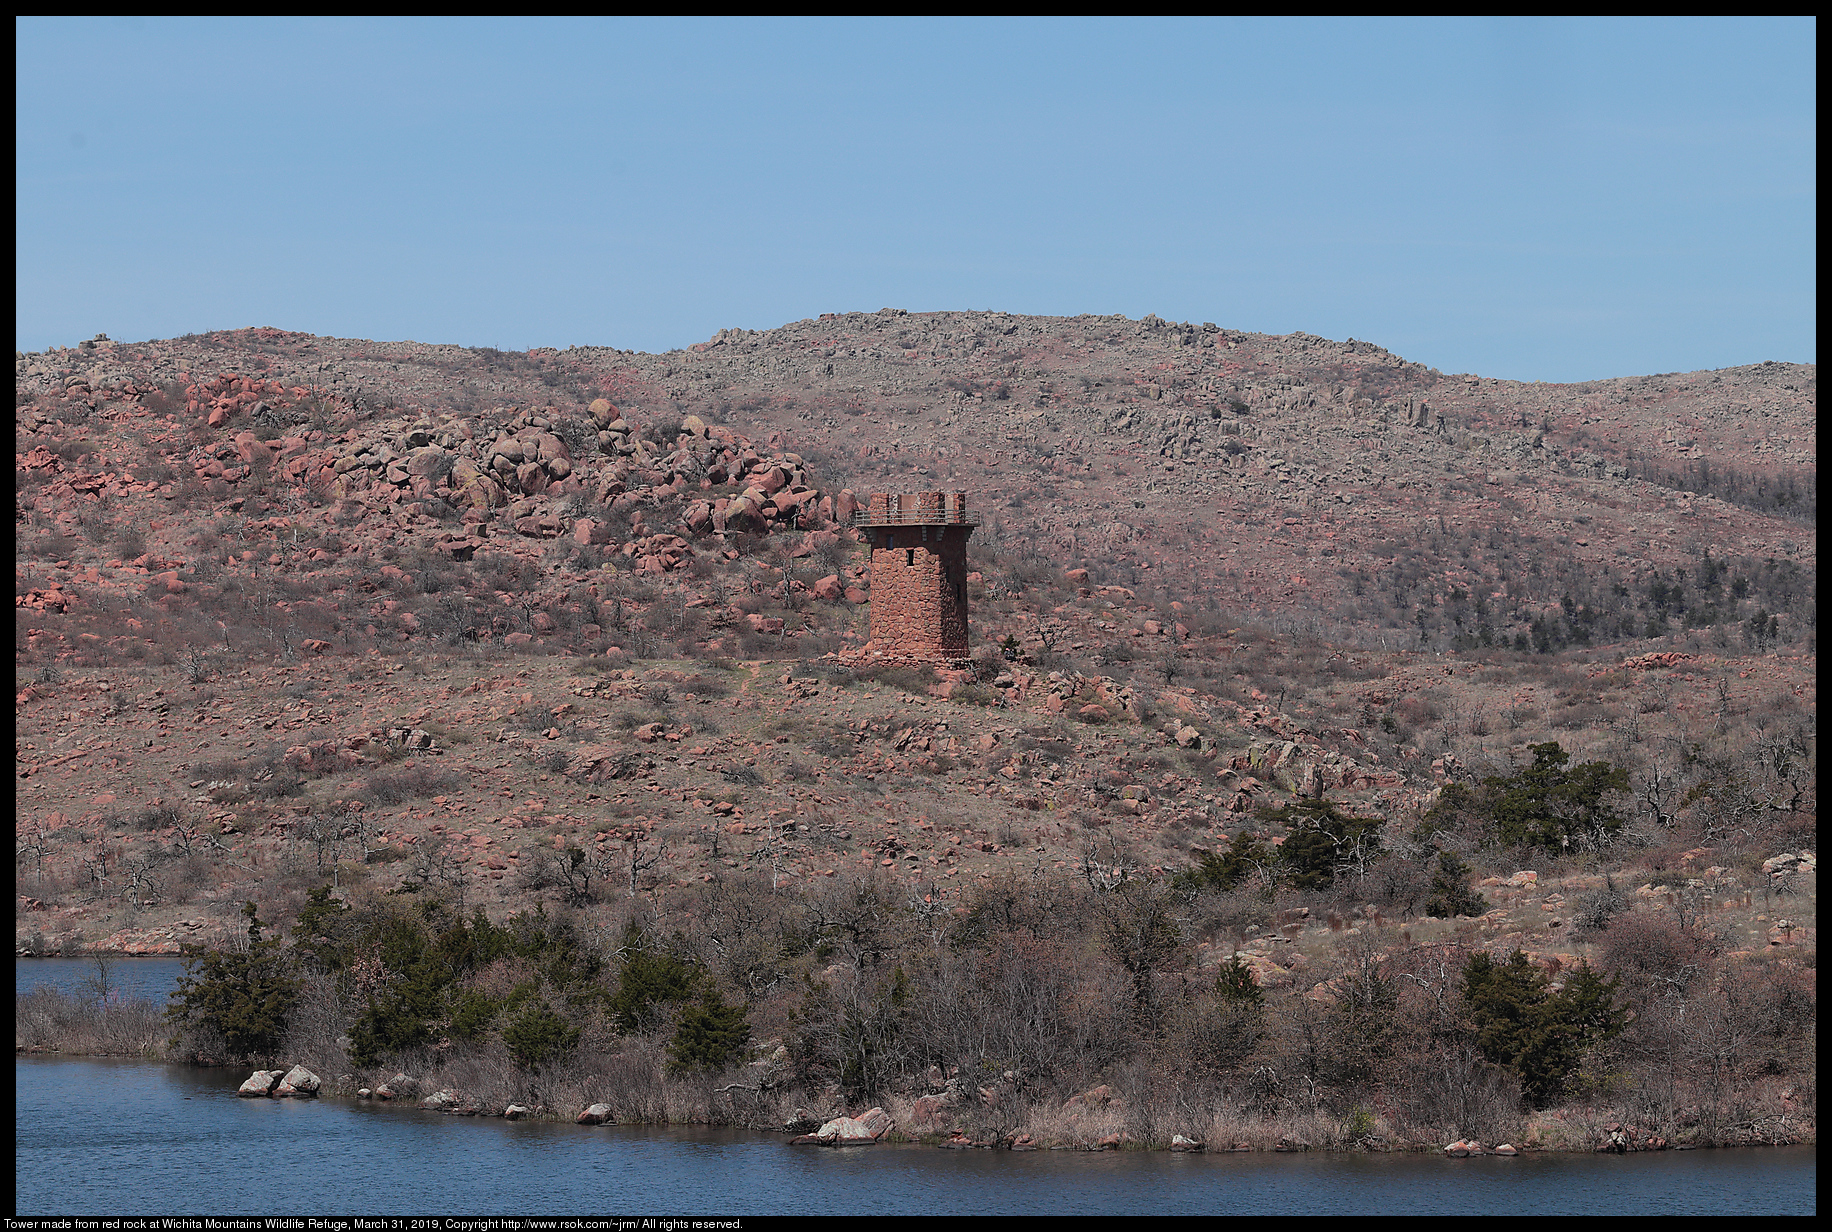 Tower made from red rock at Wichita Mountains National Wildlife Refuge